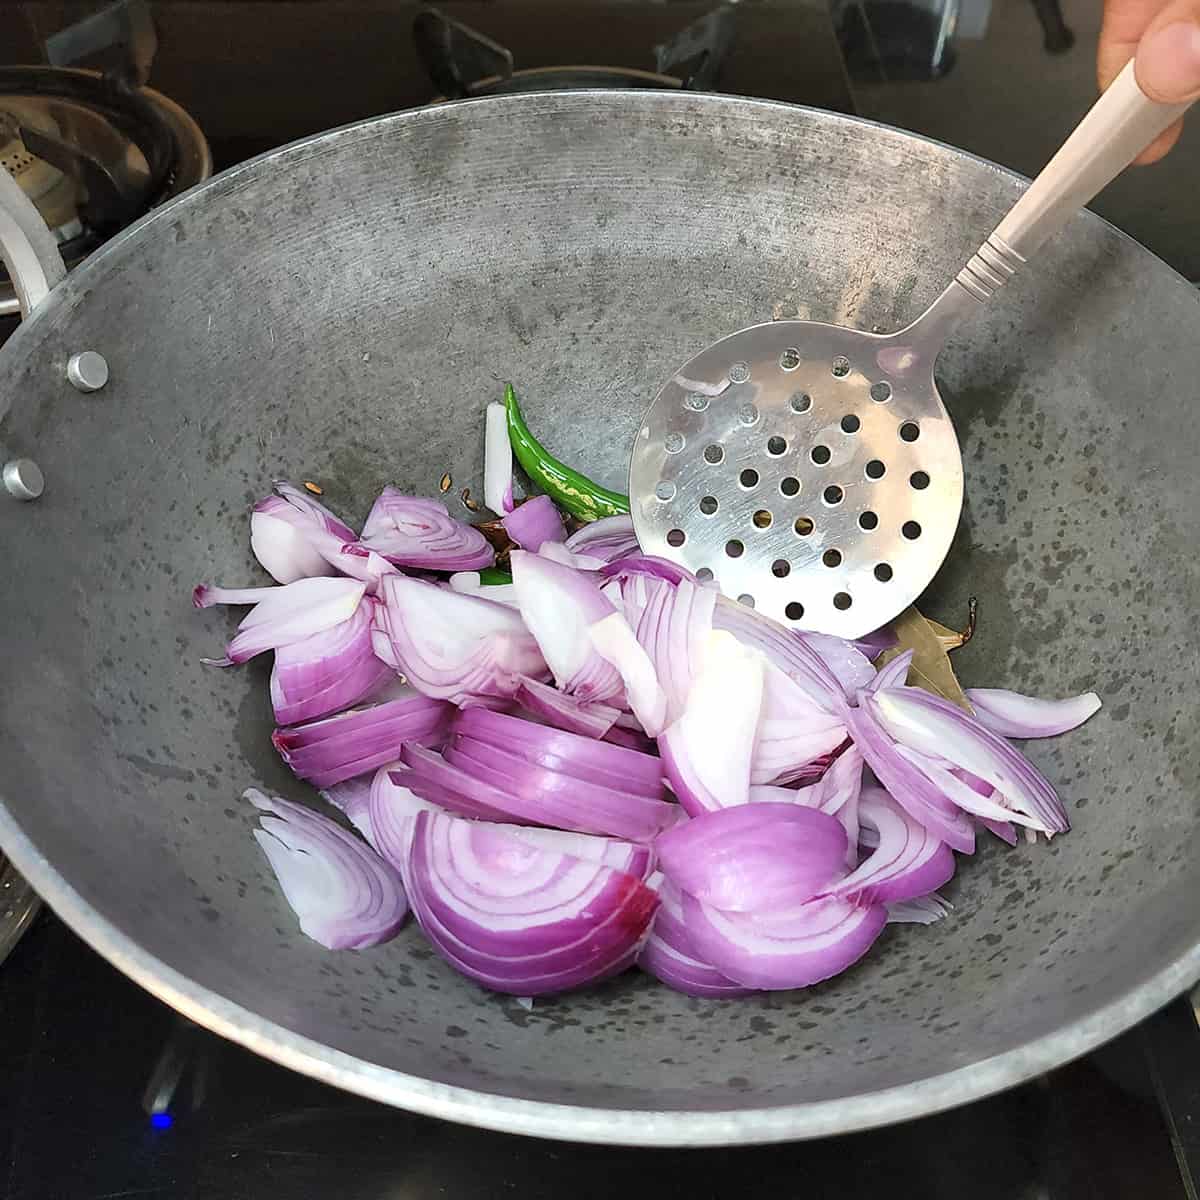 Sliced red onions added to the pan while preparing the best chicken pilaf.